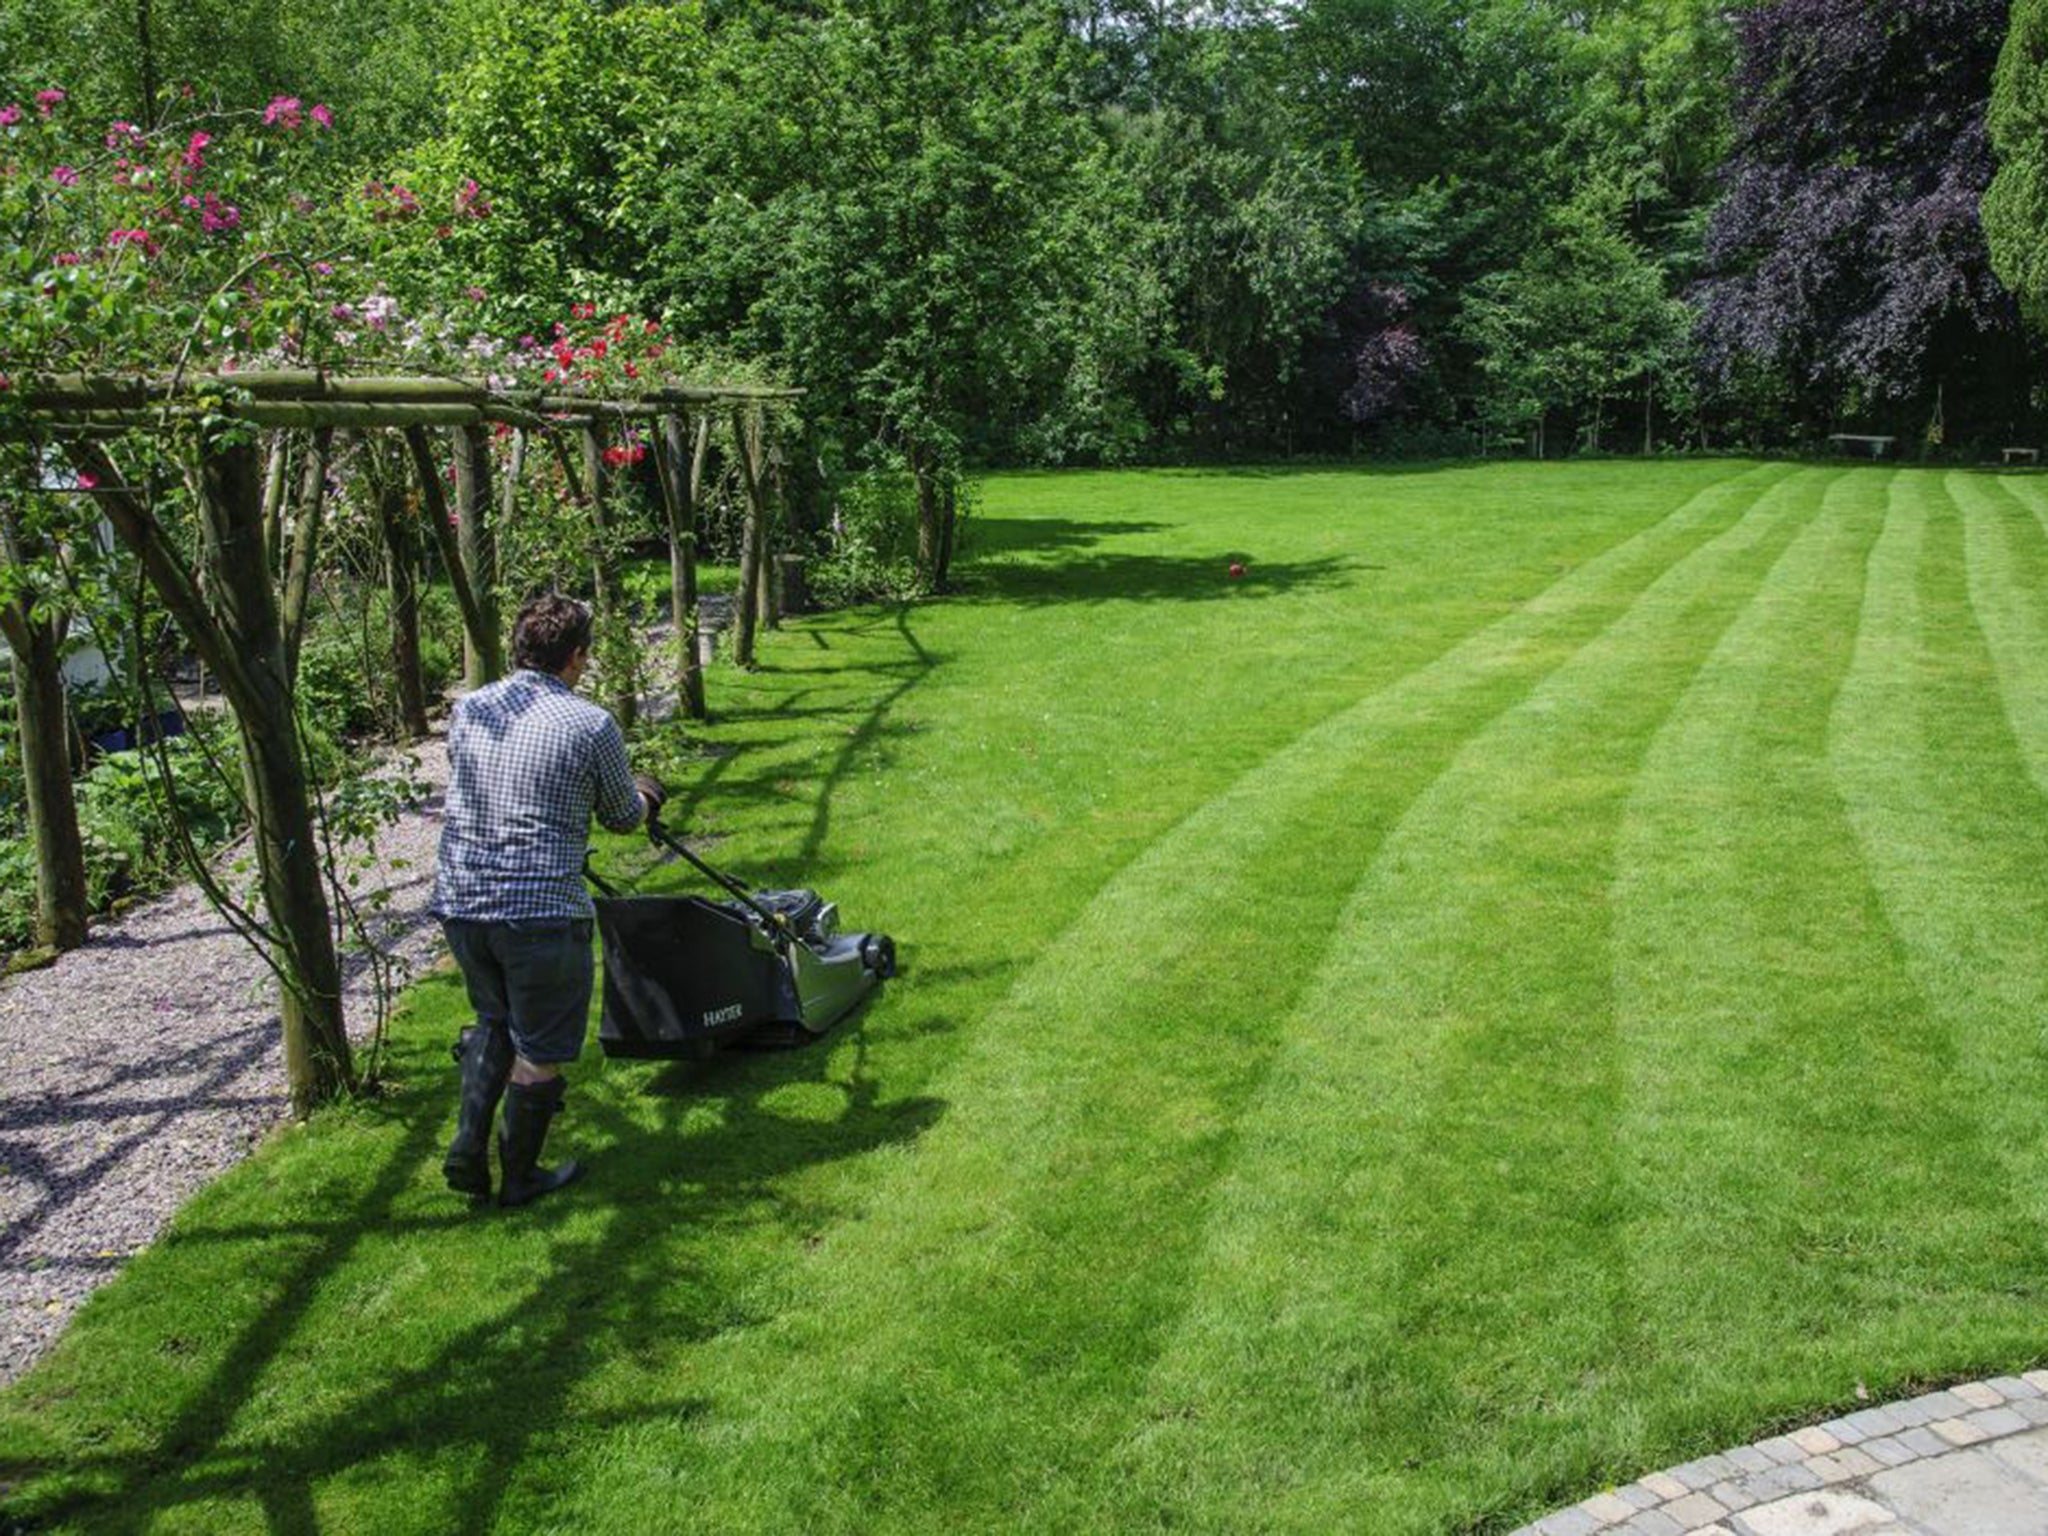 Once the energy expended by mowing, fertiliser use and watering are taken into account, lawns actually produce more greenhouse gases than they soak up (Rex)